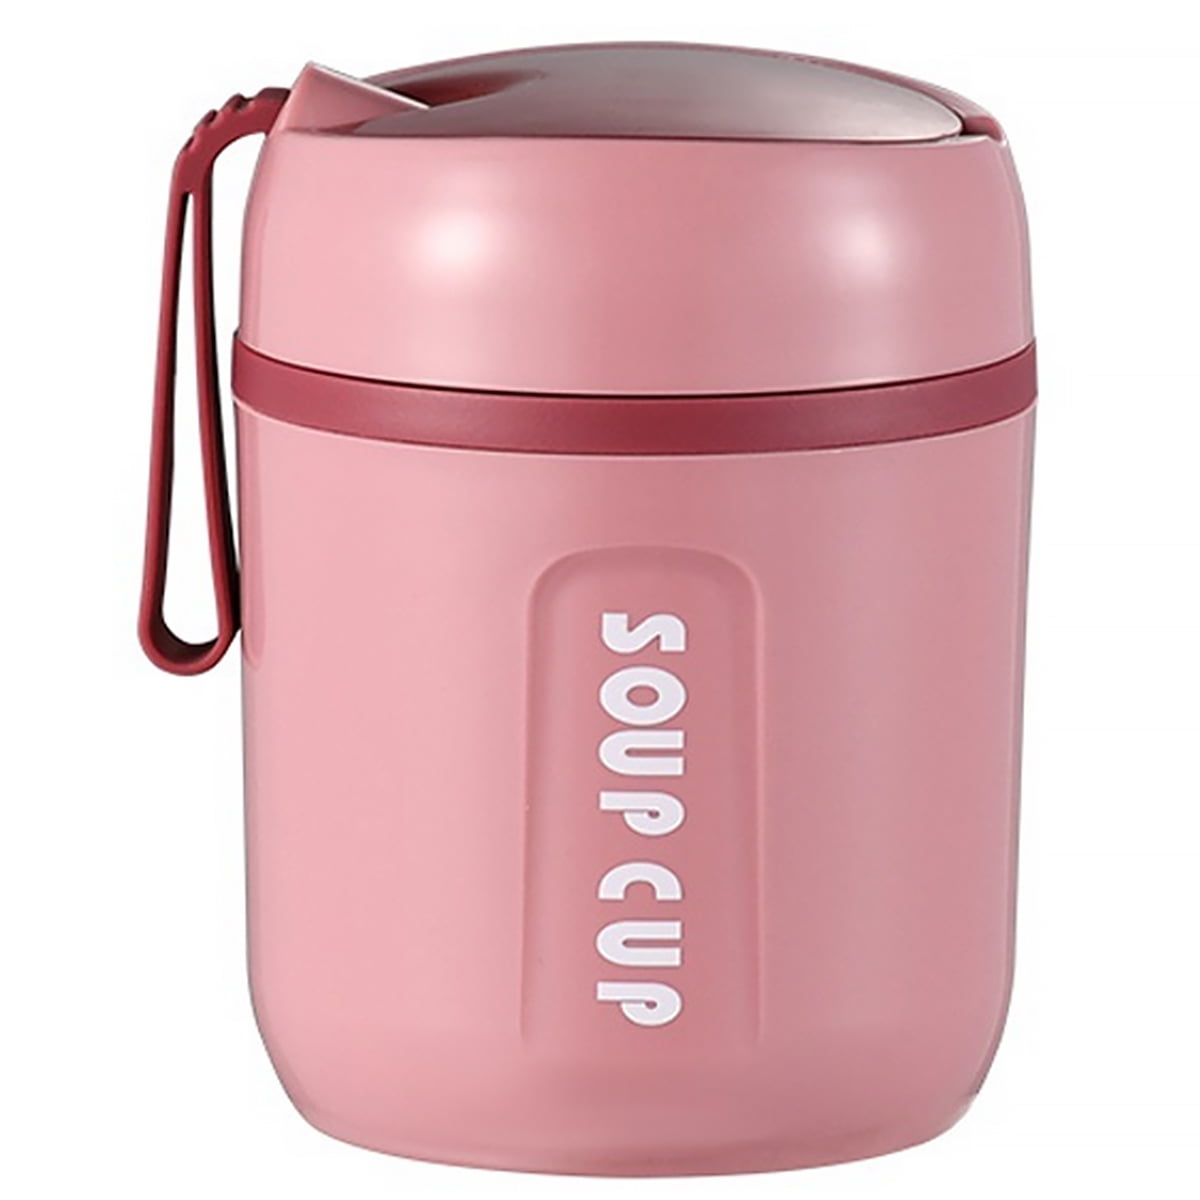  ACOTUM Insulated Thermos Food Jar for Kids - 12 Oz Capacity,  Suitable for Hot & Cold Foods, Leak-Proof Vacuum Stainless Steel Design  with Wide Mouth for Lunches, Soups and Travel(Pink) 